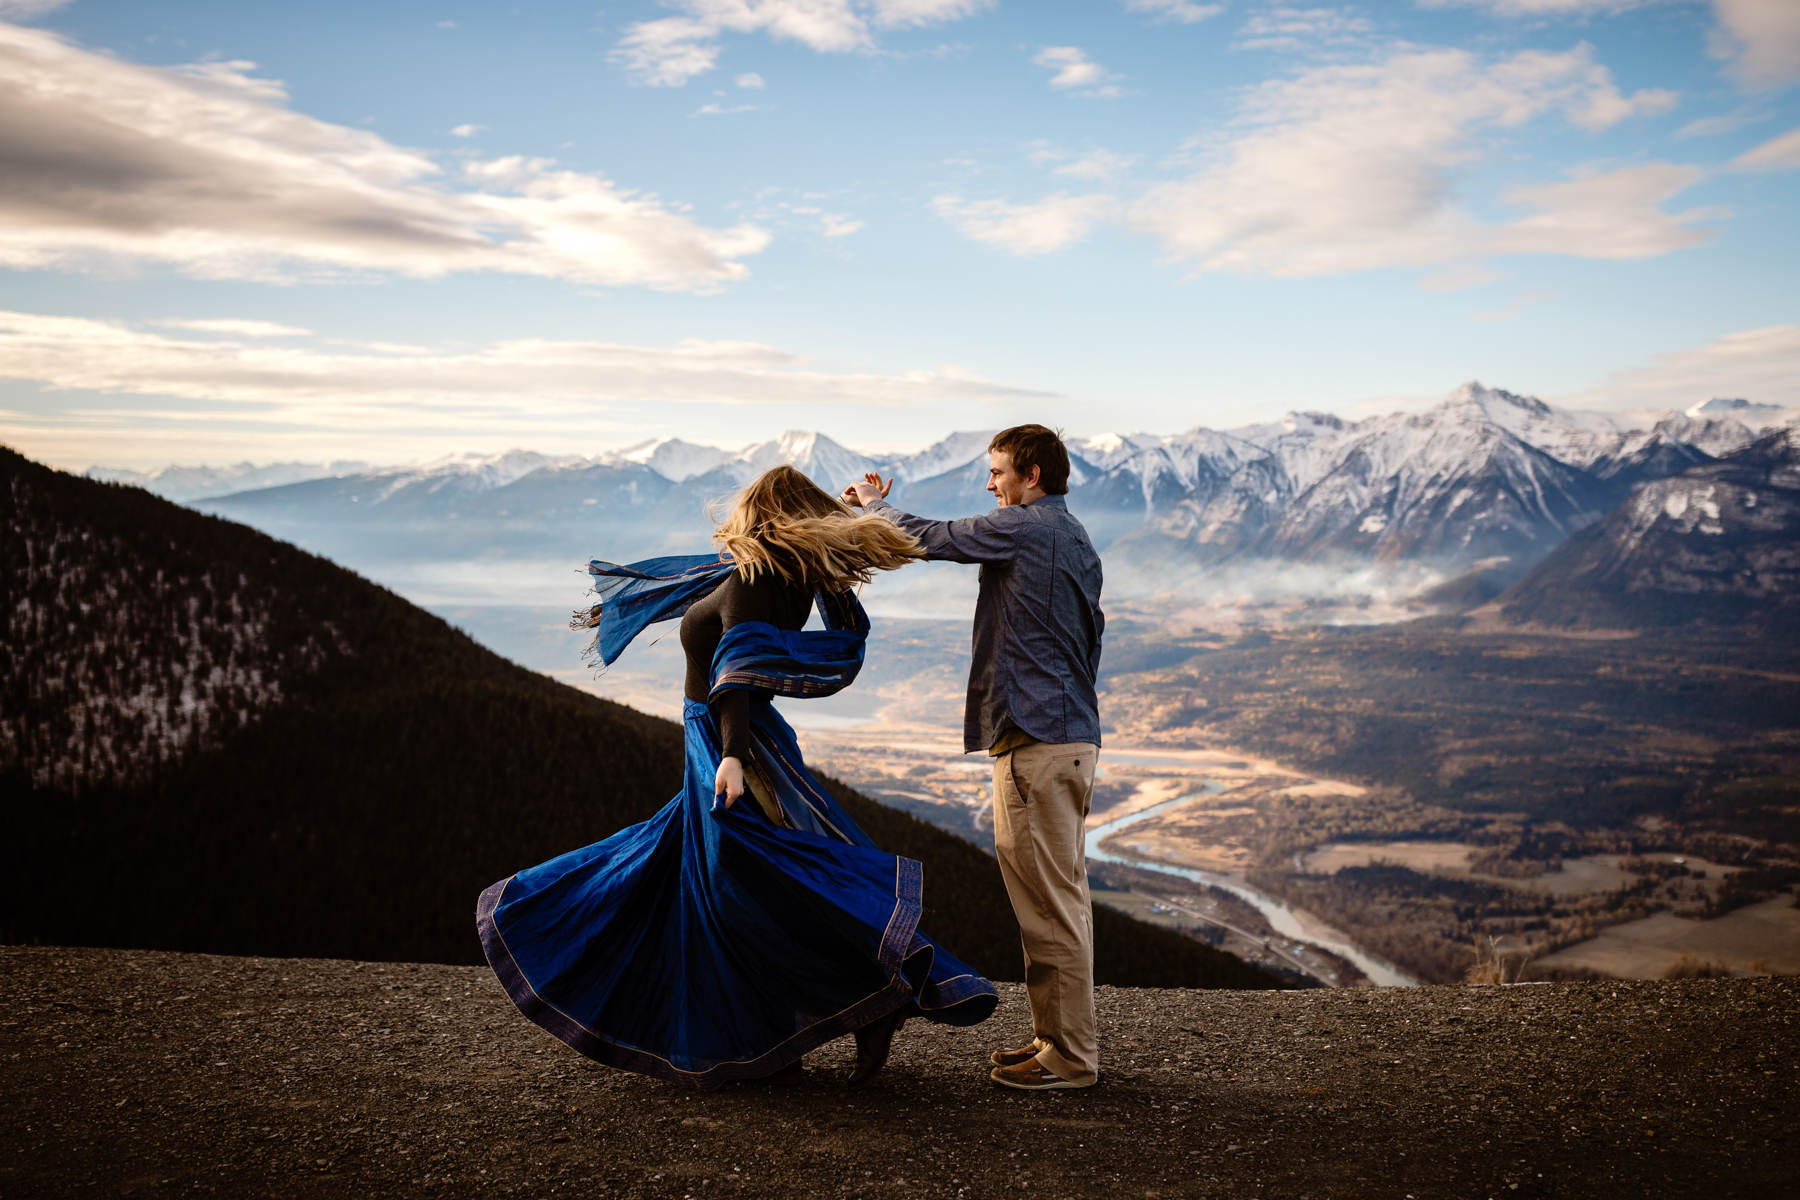 Golden Wedding Photographers in BC (British Columbia) for adventurous engagement photos on a mountain